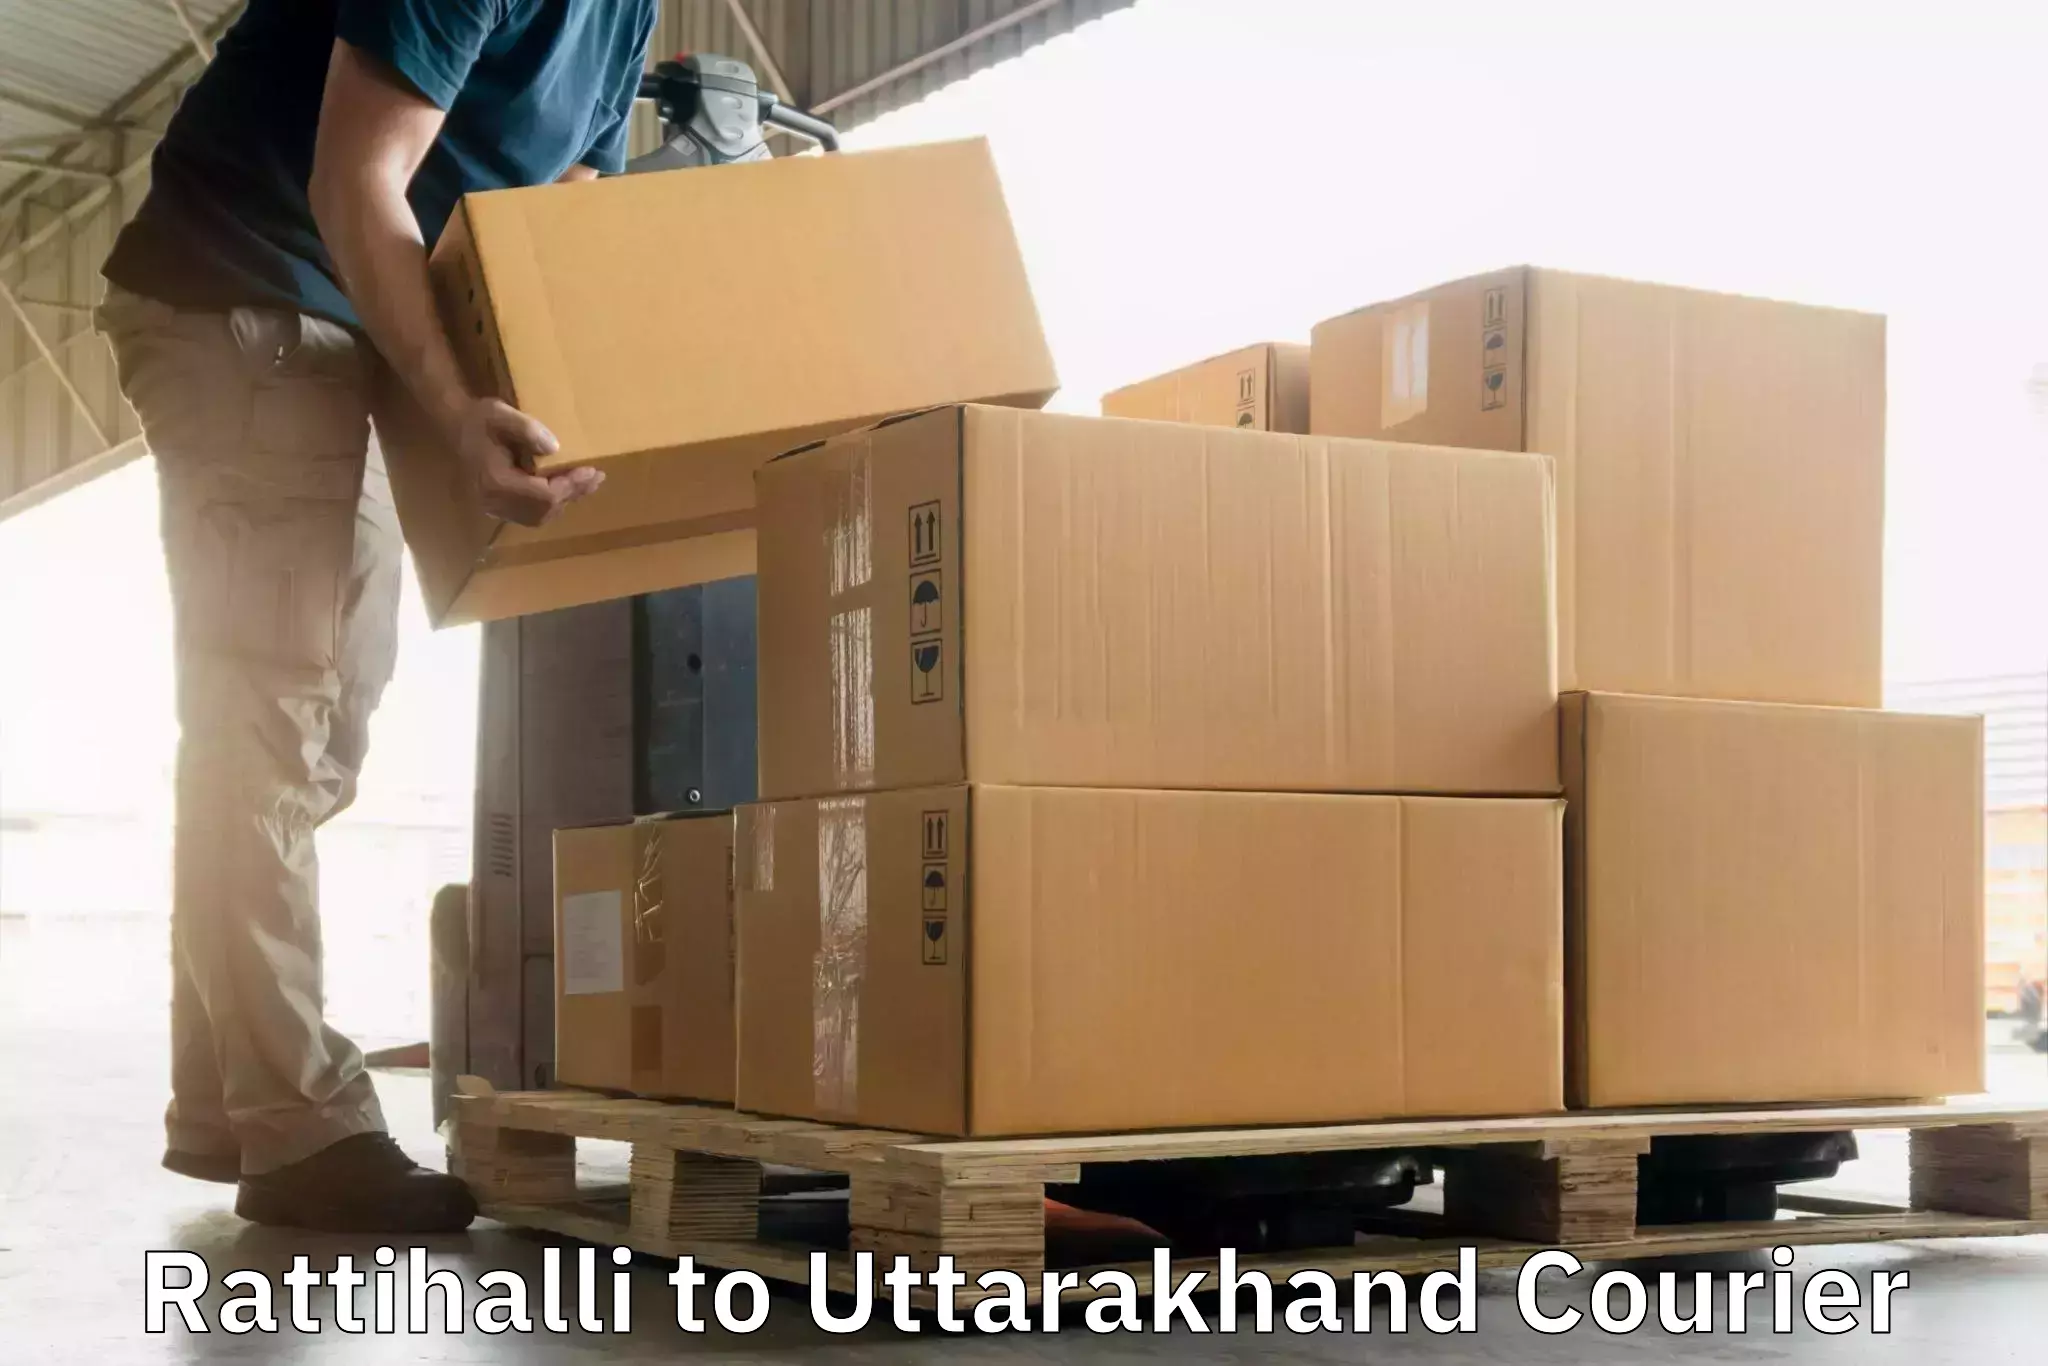 Tech-enabled shipping Rattihalli to Mussoorie